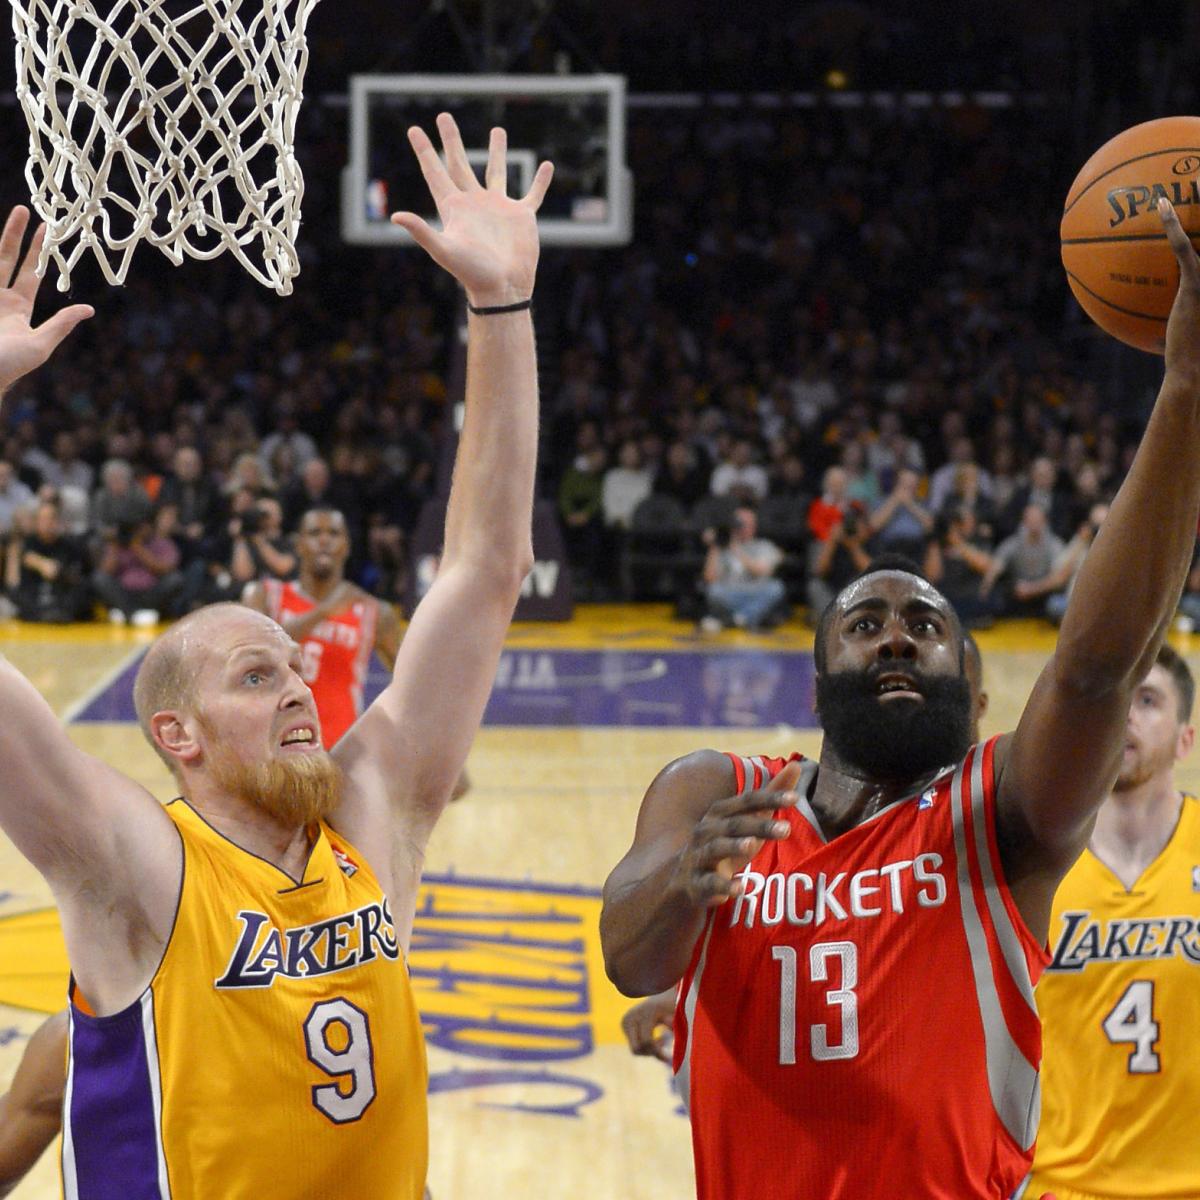 Houston Rockets vs. Los Angeles Lakers Live Score and Analysis News, Scores, Highlights